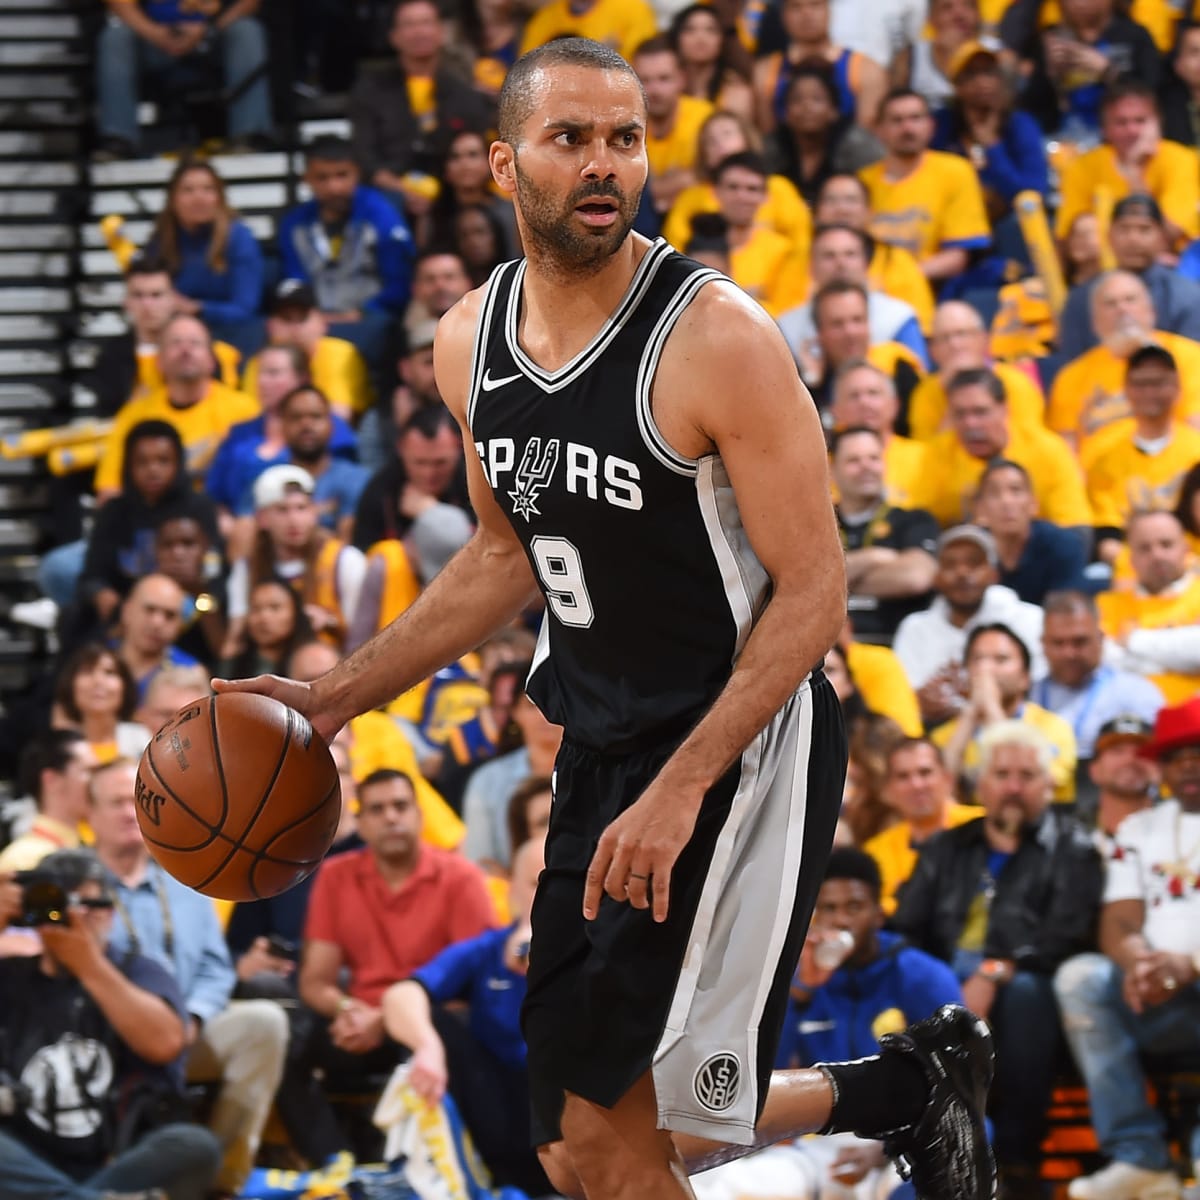 Classic Photos of Tony Parker - Sports Illustrated